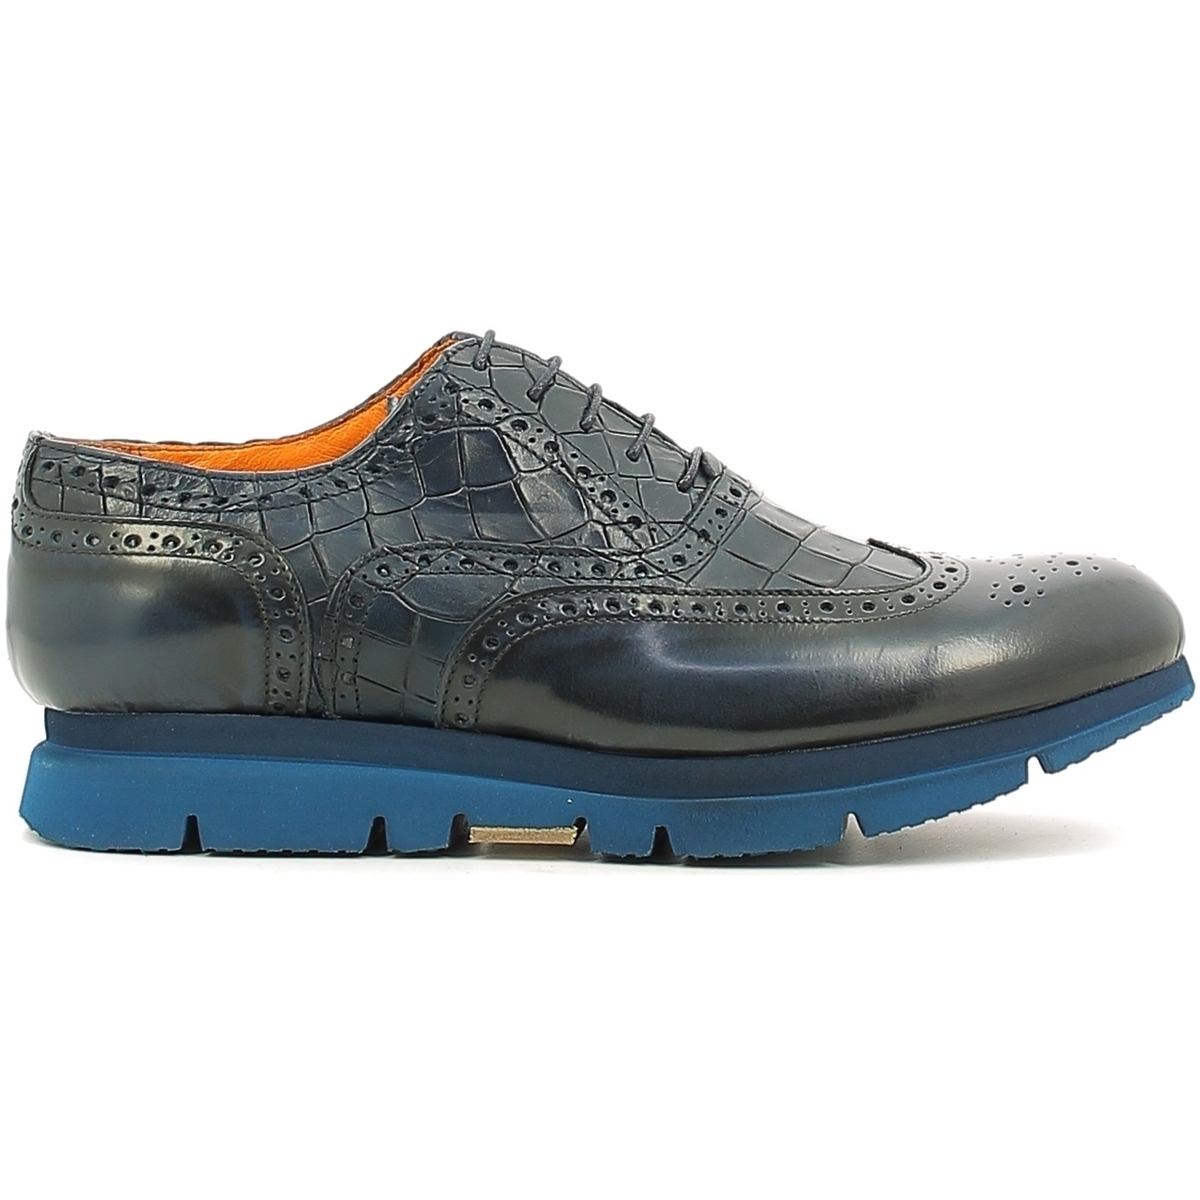 Oxfords Rogers 3863-6